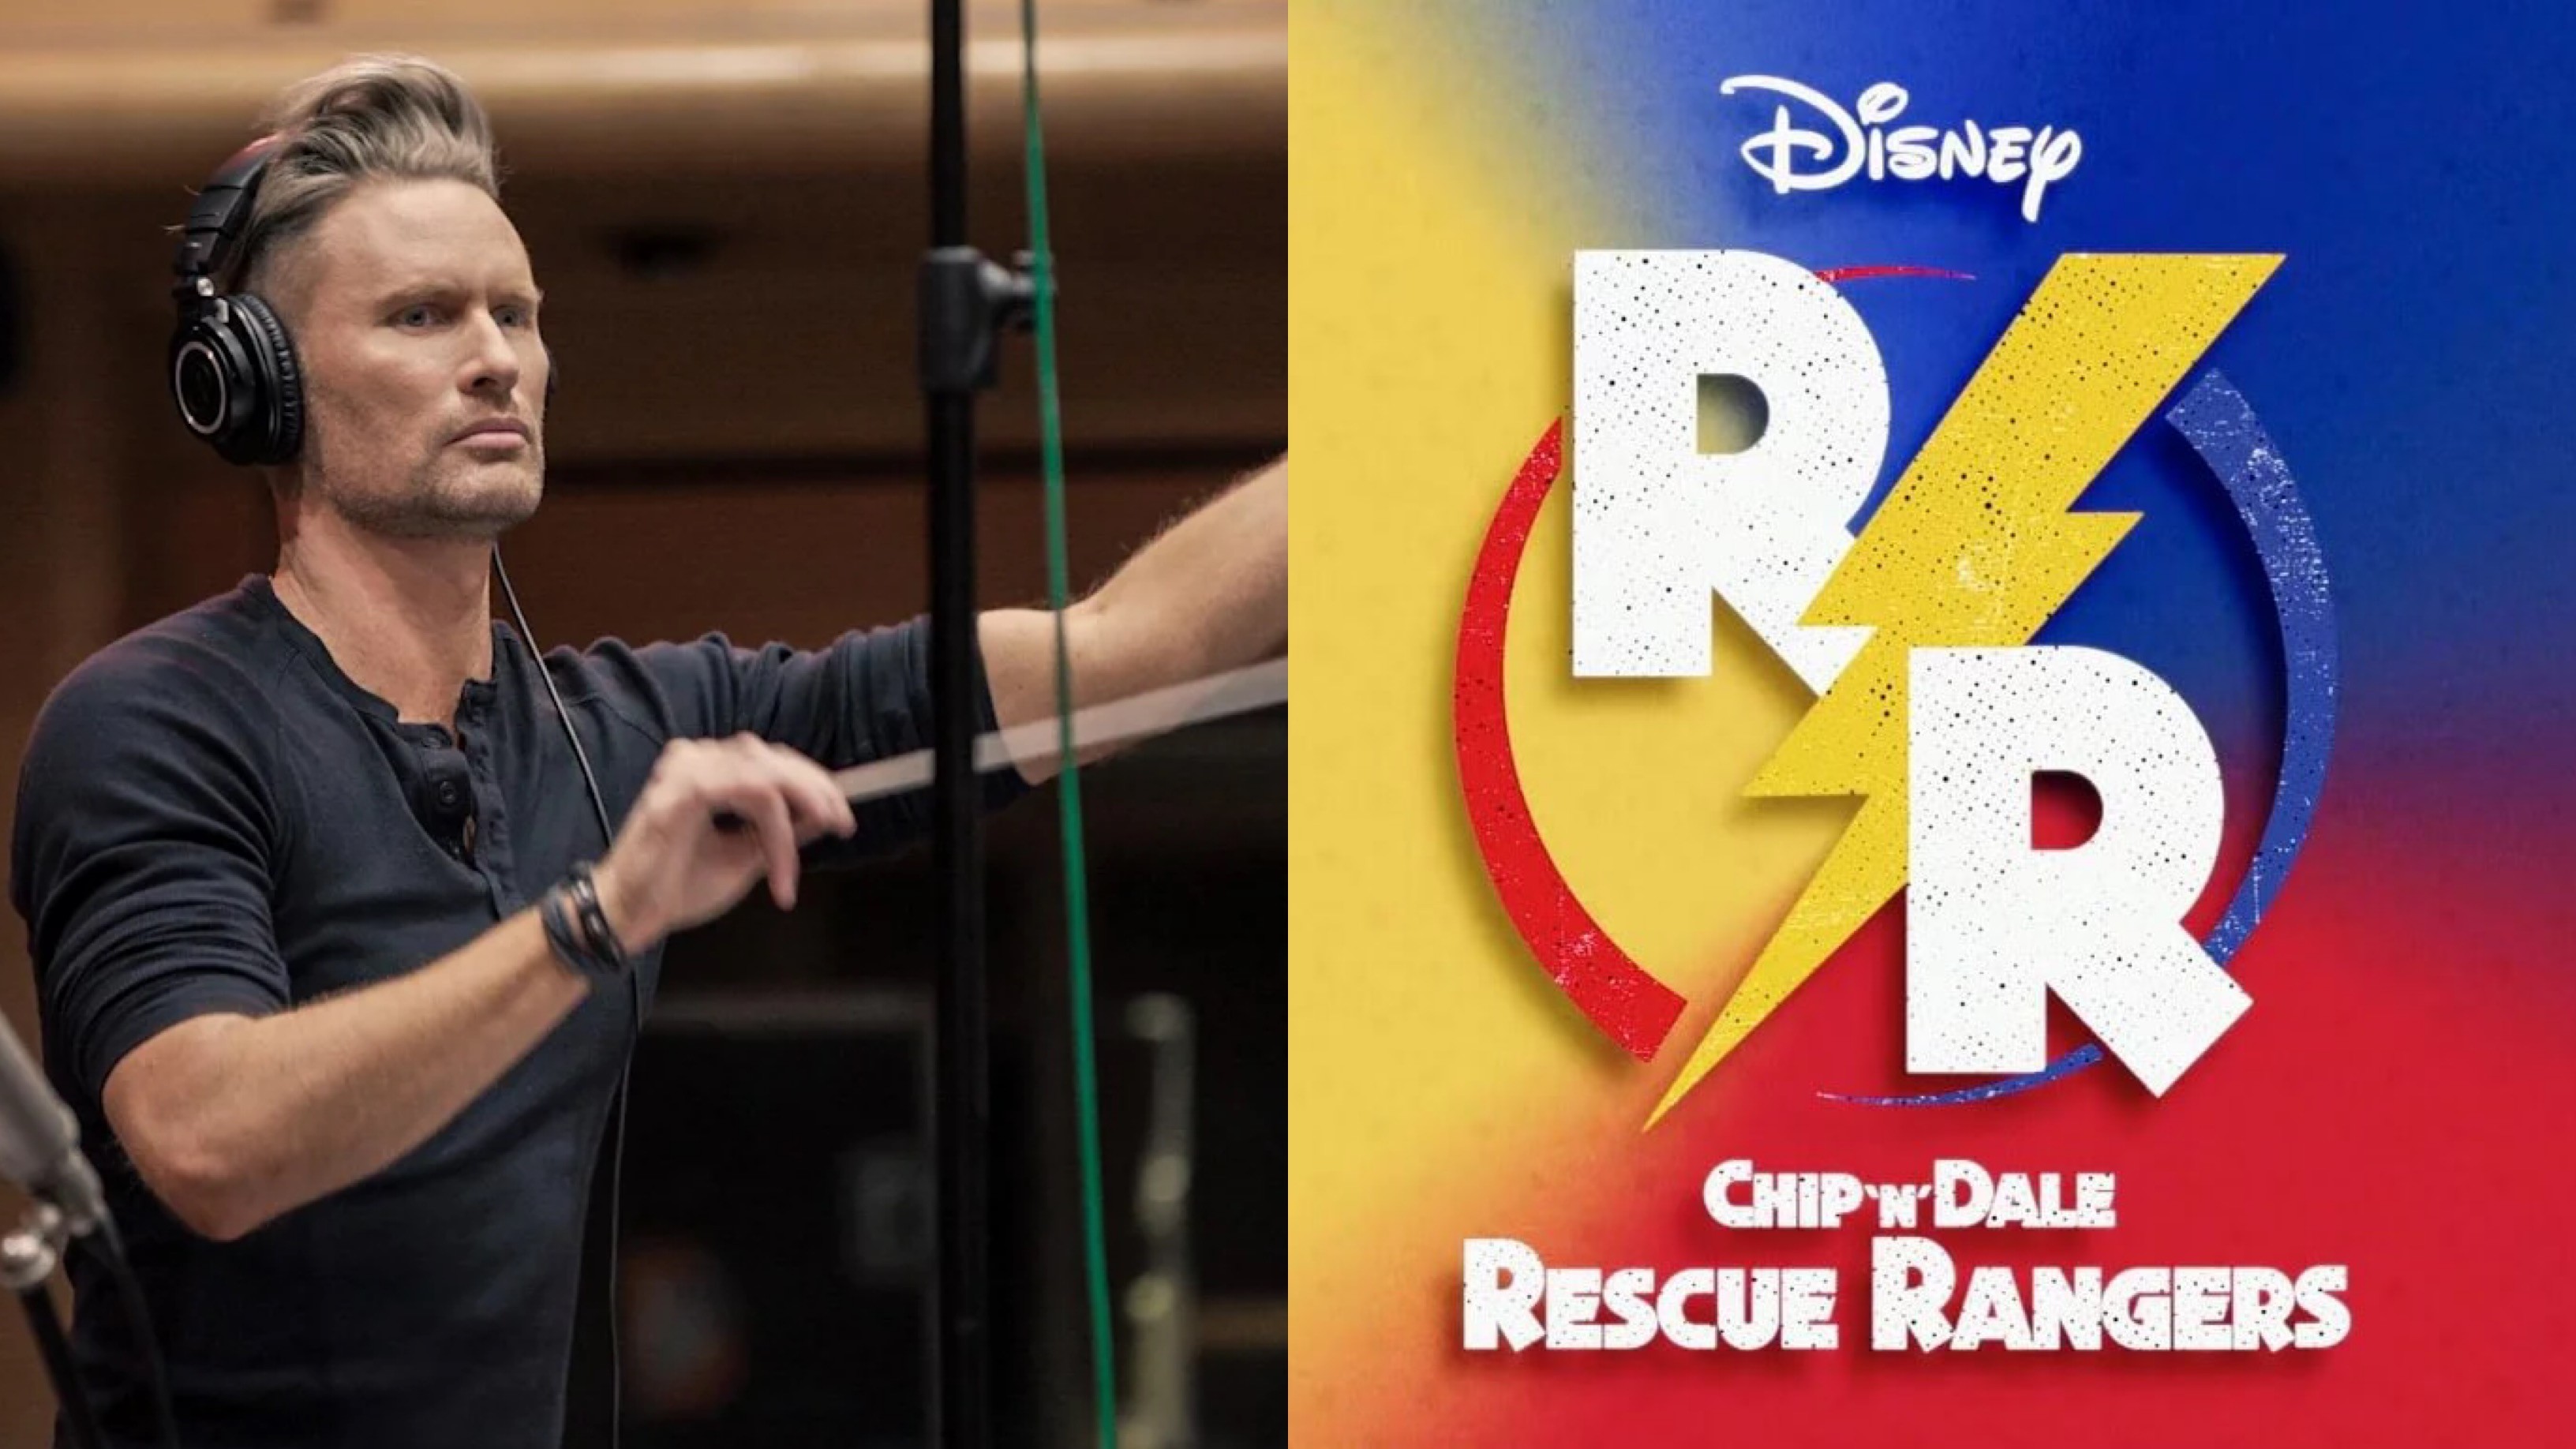 Brian Tyler to Score Disney+ Movie ‘Chip ‘n Dale Rescue Rangers’